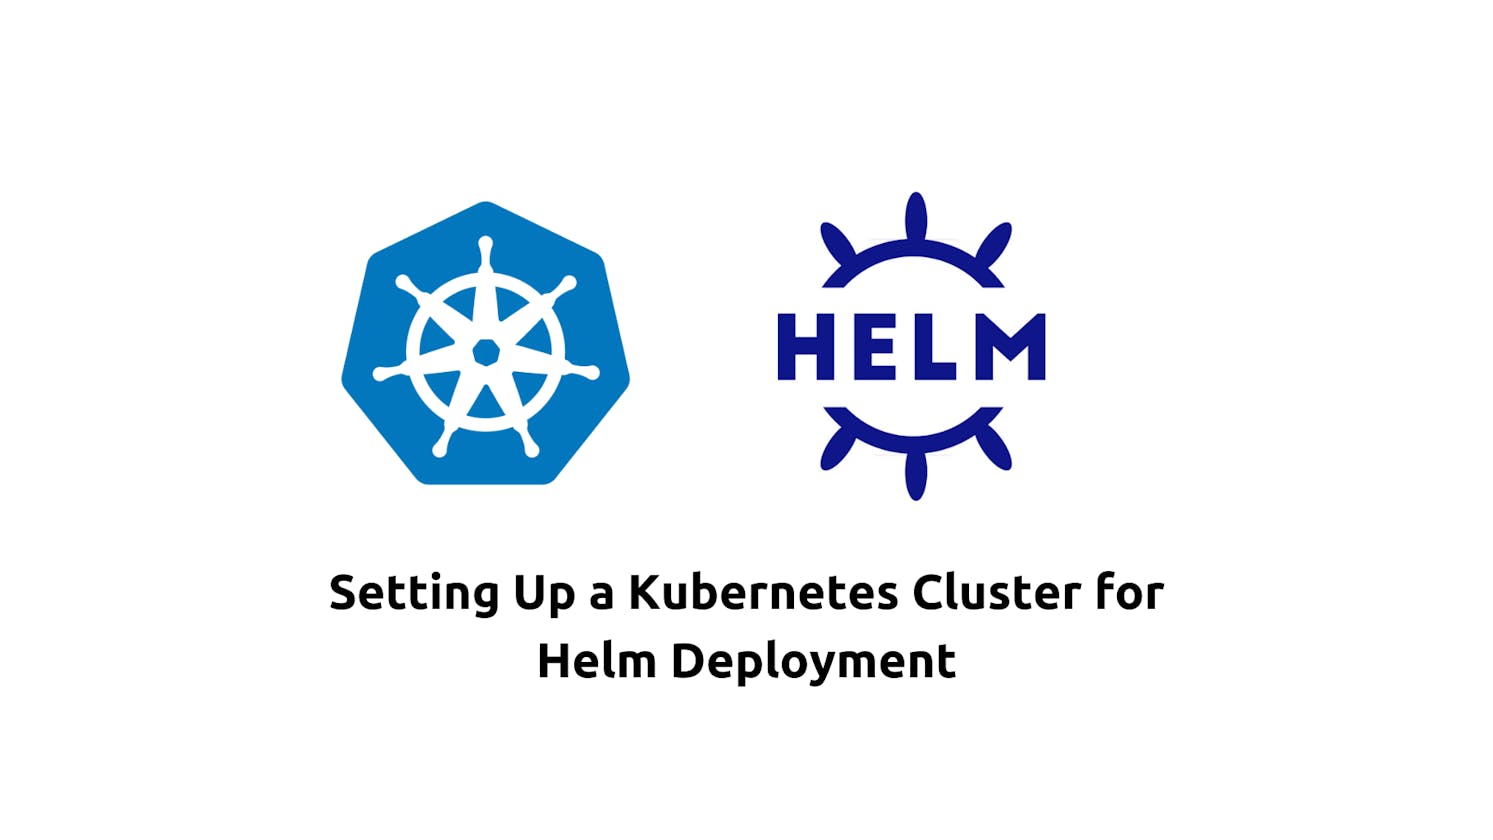 Setting Up a Kubernetes Cluster for Helm Deployment